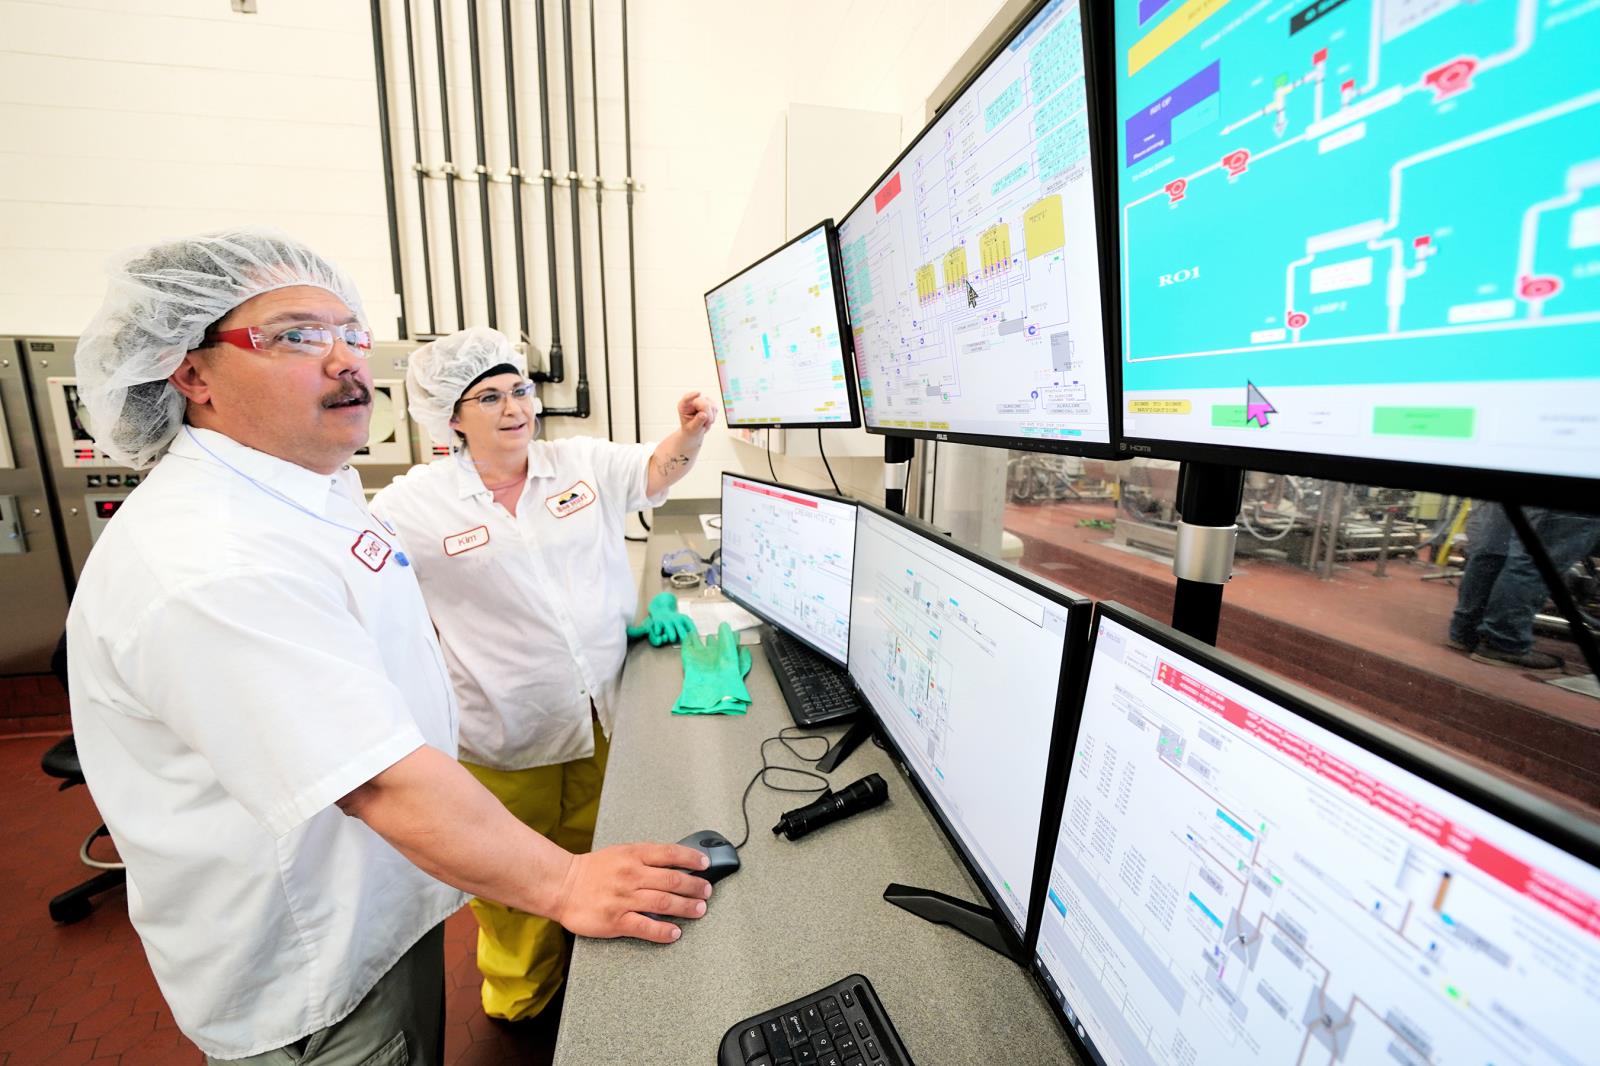 High Desert Milk employees Fabian Beltran and Kim Espinoza monitor processes in the control room of the cooperative’s Burley dairy processing facility July 28. The Burley-based cooperative, one of Idaho’s leading dairy processors, is undergoing a $50 million expansion that will nearly double its total output.